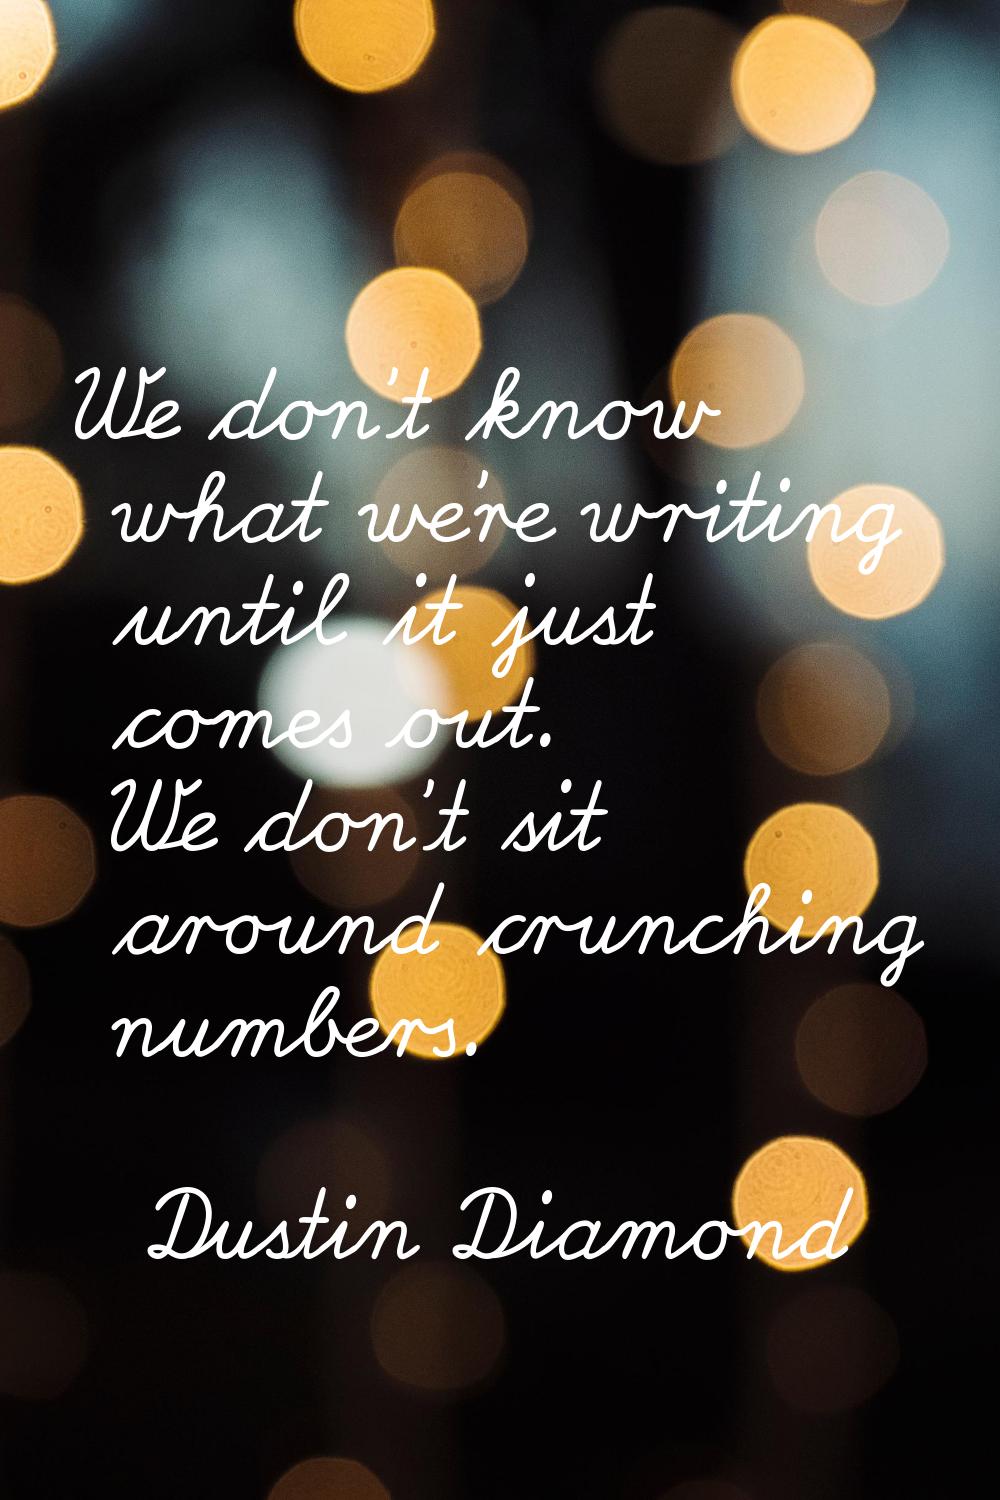 We don't know what we're writing until it just comes out. We don't sit around crunching numbers.